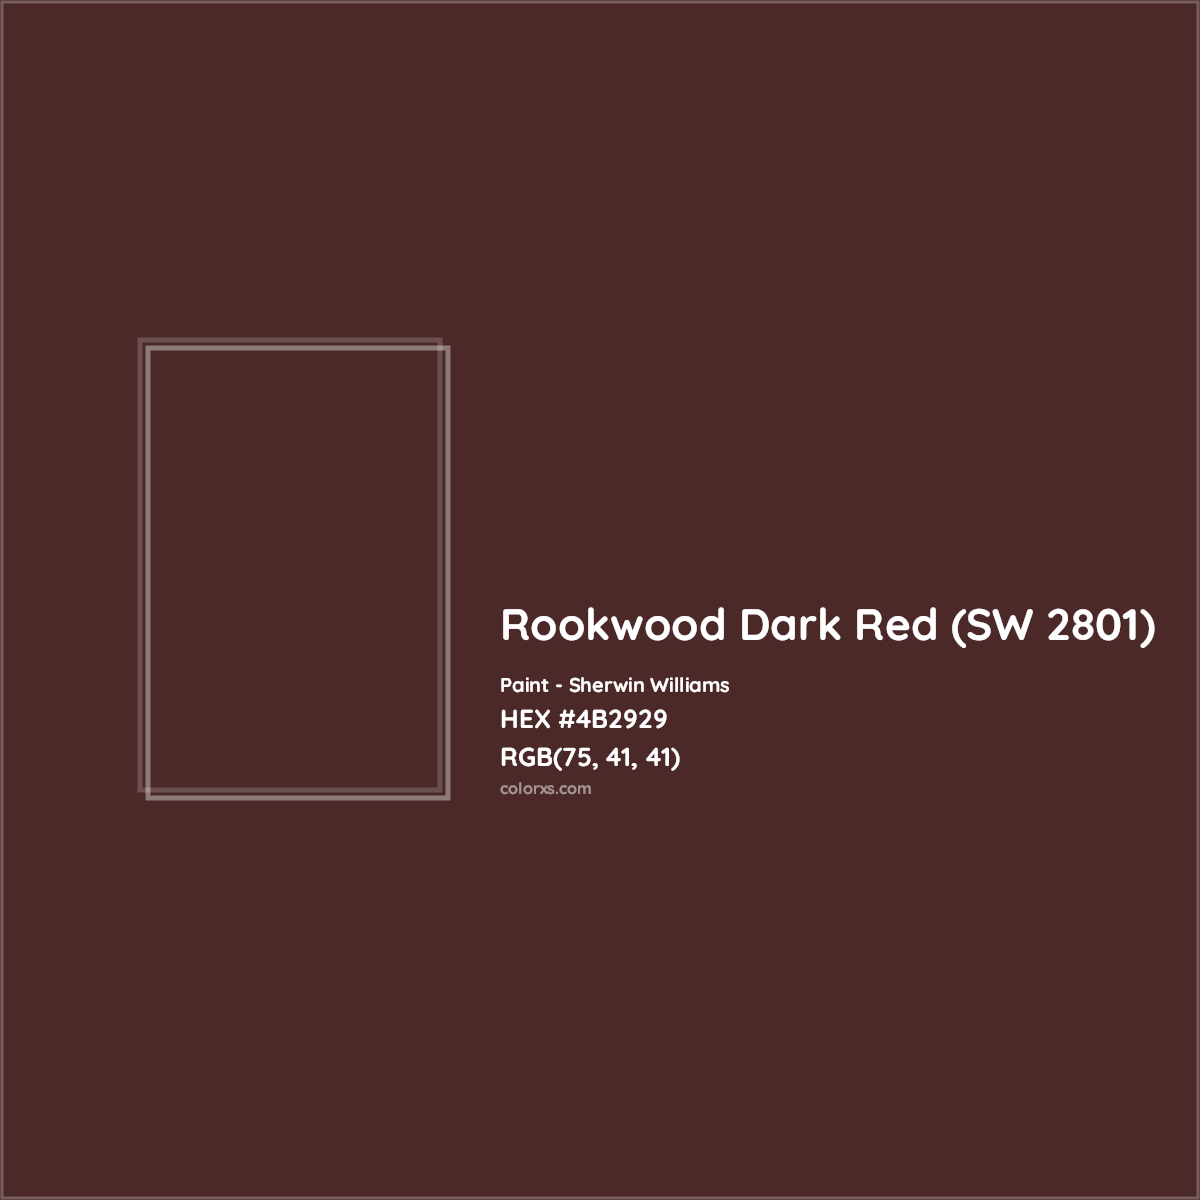 HEX #4B2929 Rookwood Dark Red (SW 2801) Paint Sherwin Williams - Color Code